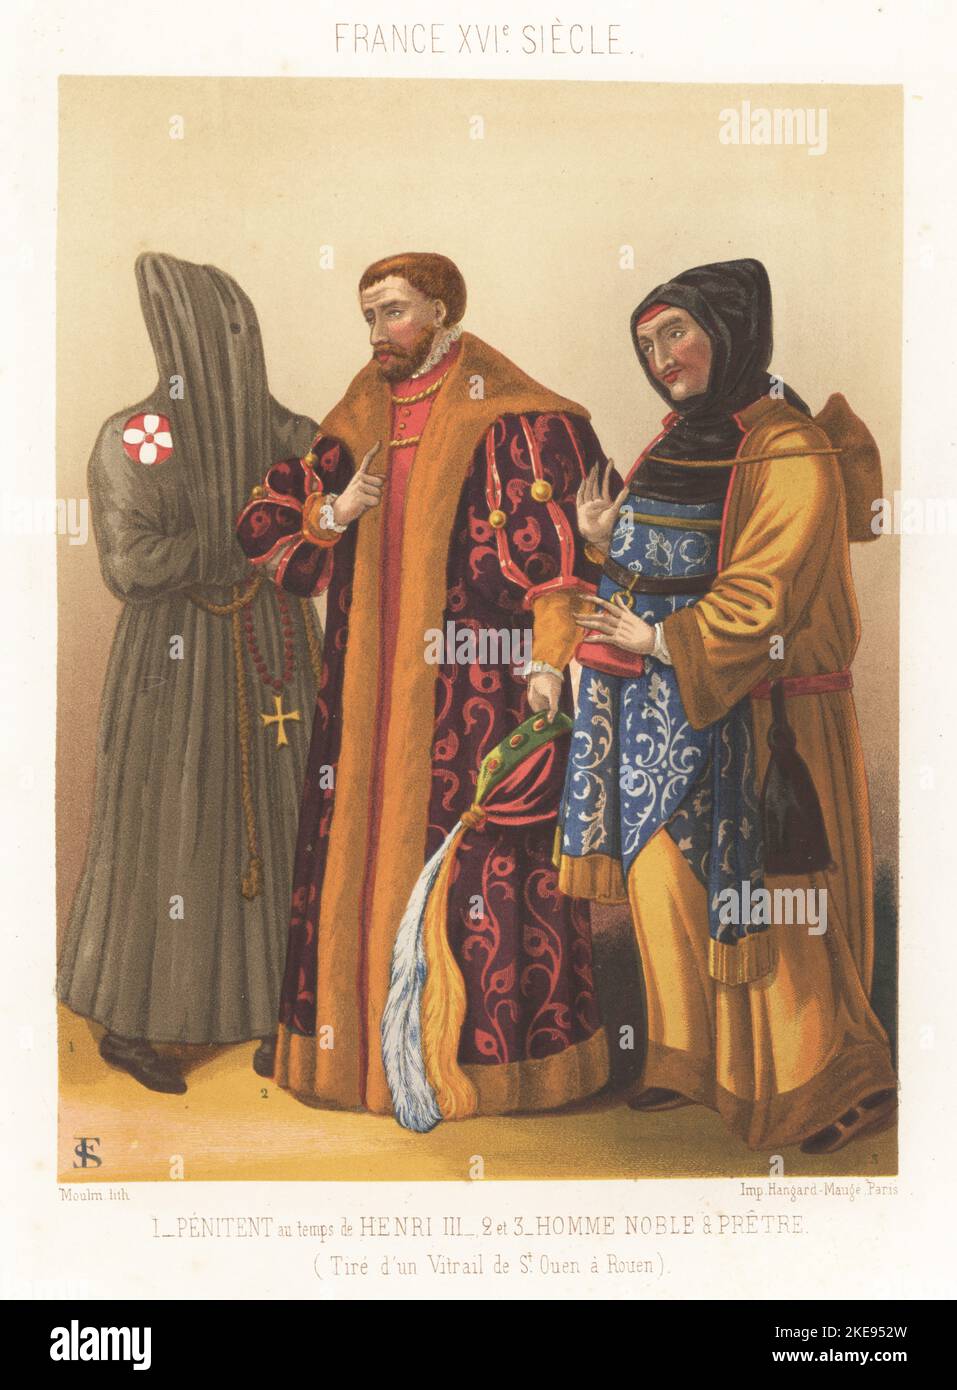 Penitent in hooded robe, nobleman in brocade coat, and priest with alms bag and satchel, France, 16th century. Penitent au temps de Henri III, homme noble et pretre. XVIe siecle. Taken from a stained-glass window in Saint-Ouen Abbey, Rouen. Chromolithograph by Moulin after Ferdinand Sere from Charles Louandre’s Les Arts Somptuaires, The Sumptuary Arts, Hangard-Mauge, Paris, 1858. Stock Photo